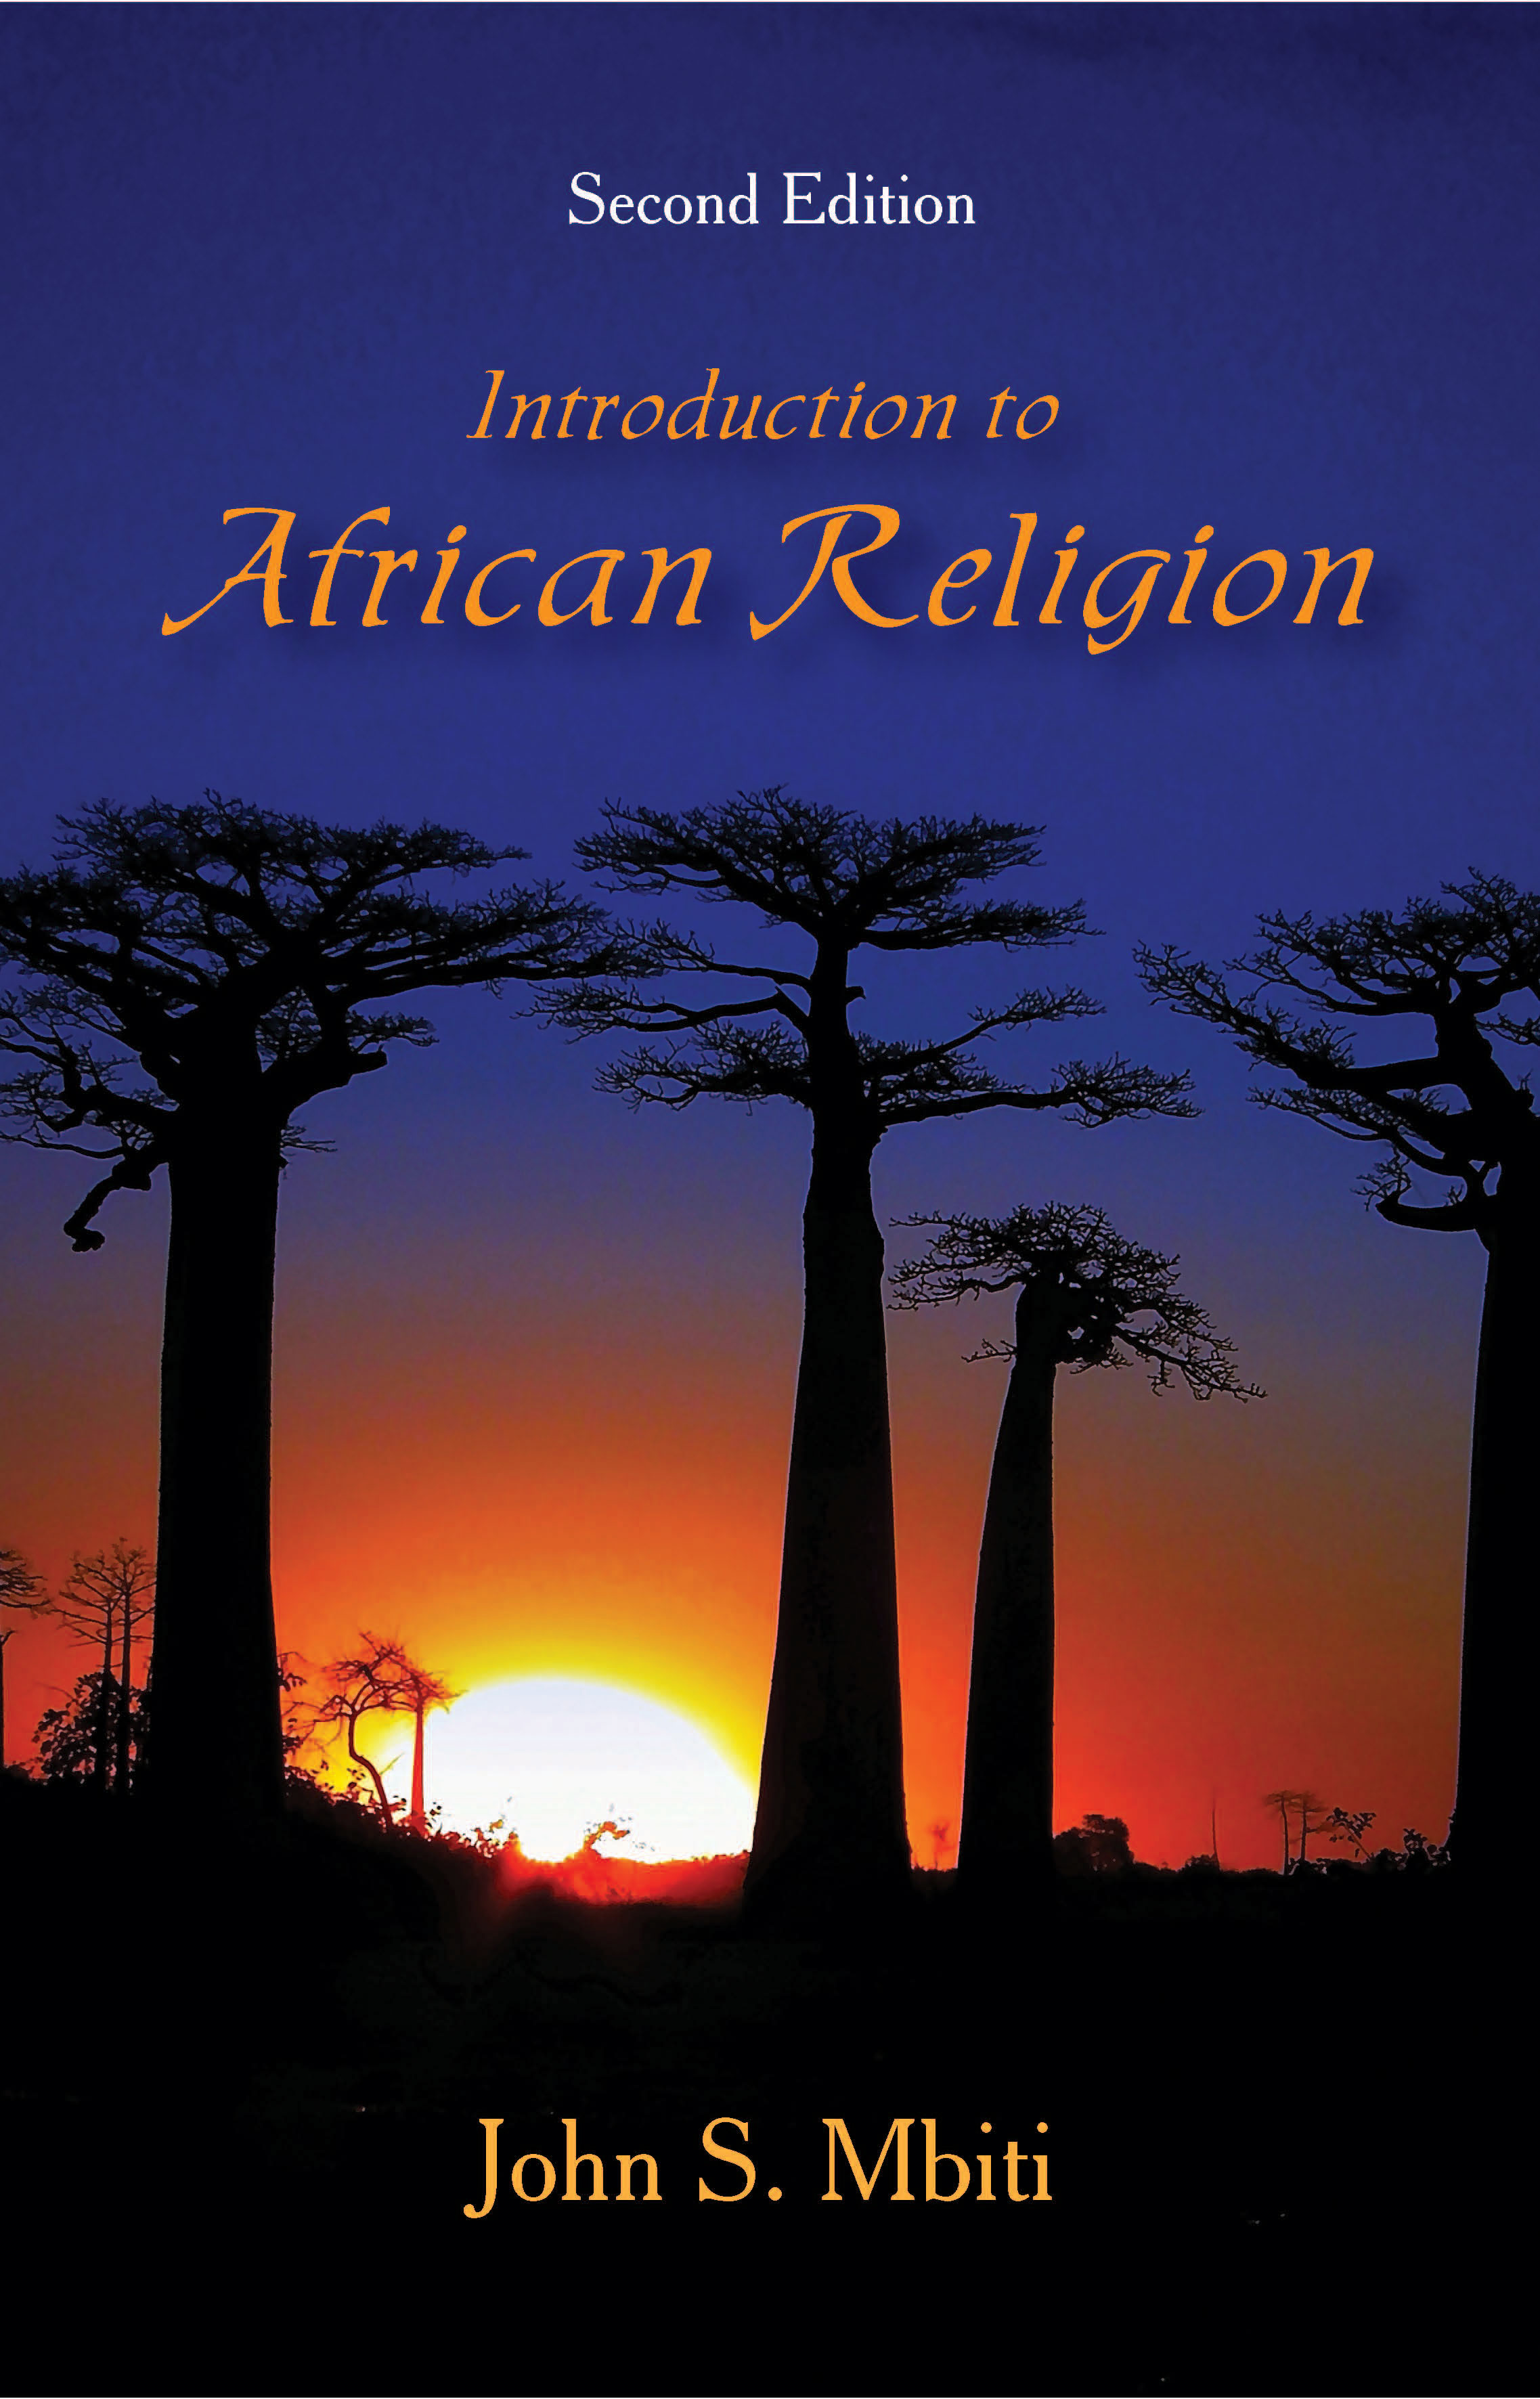 Introduction to African Religion: Second Edition by John S. Mbiti